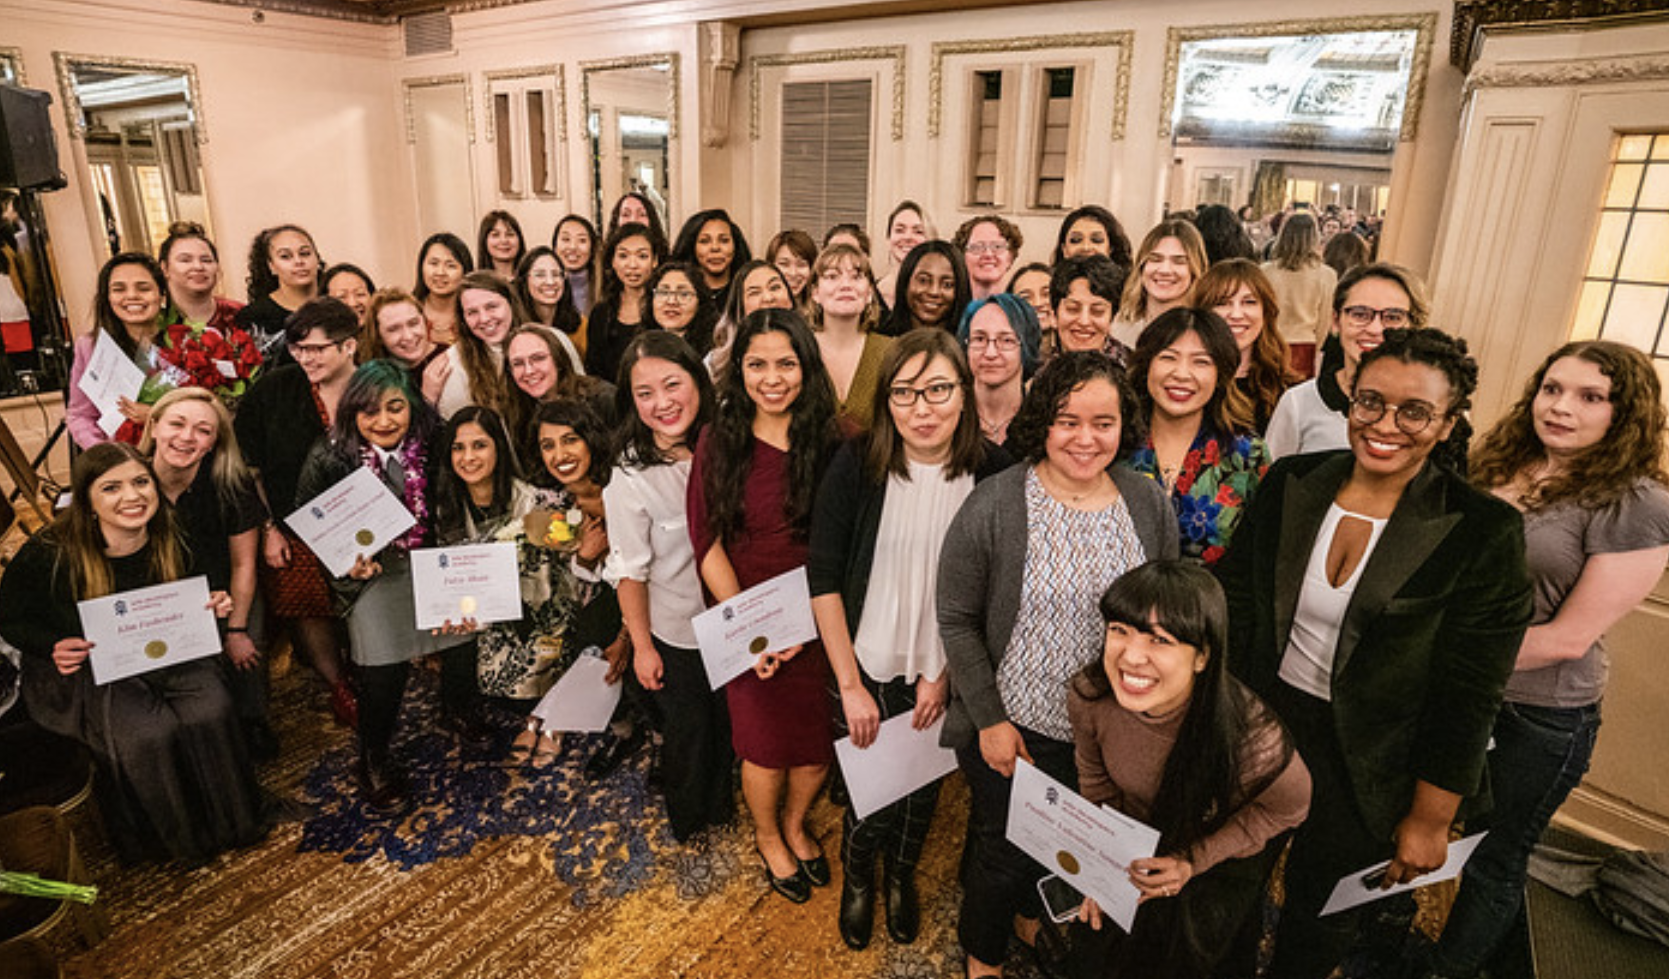 Large group of women in business dress holding diplomas